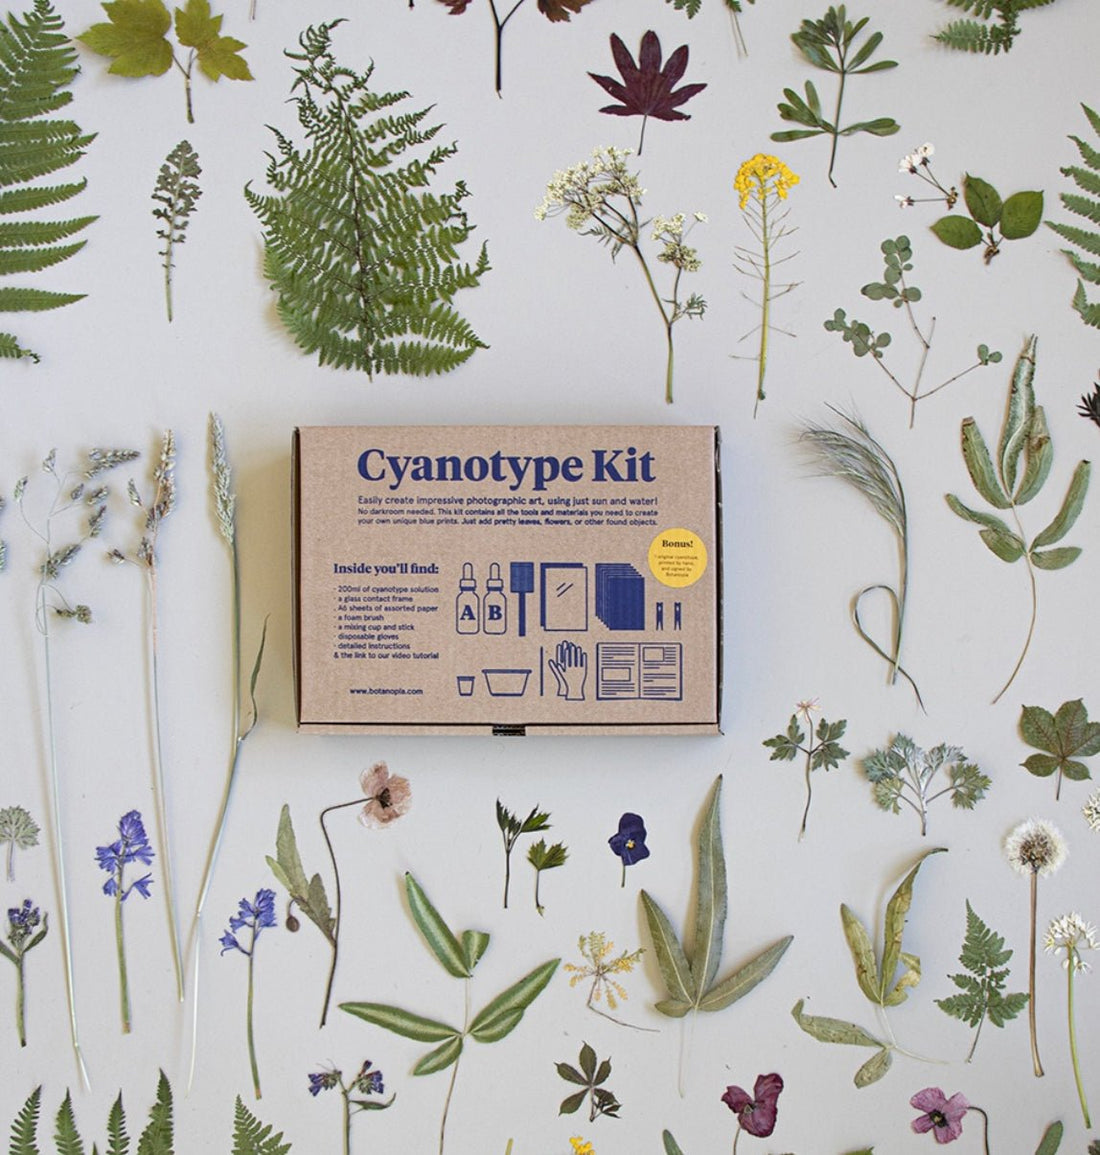 Cyanotype Kit - DIY kit to make your own blueprints - The Flower Crate